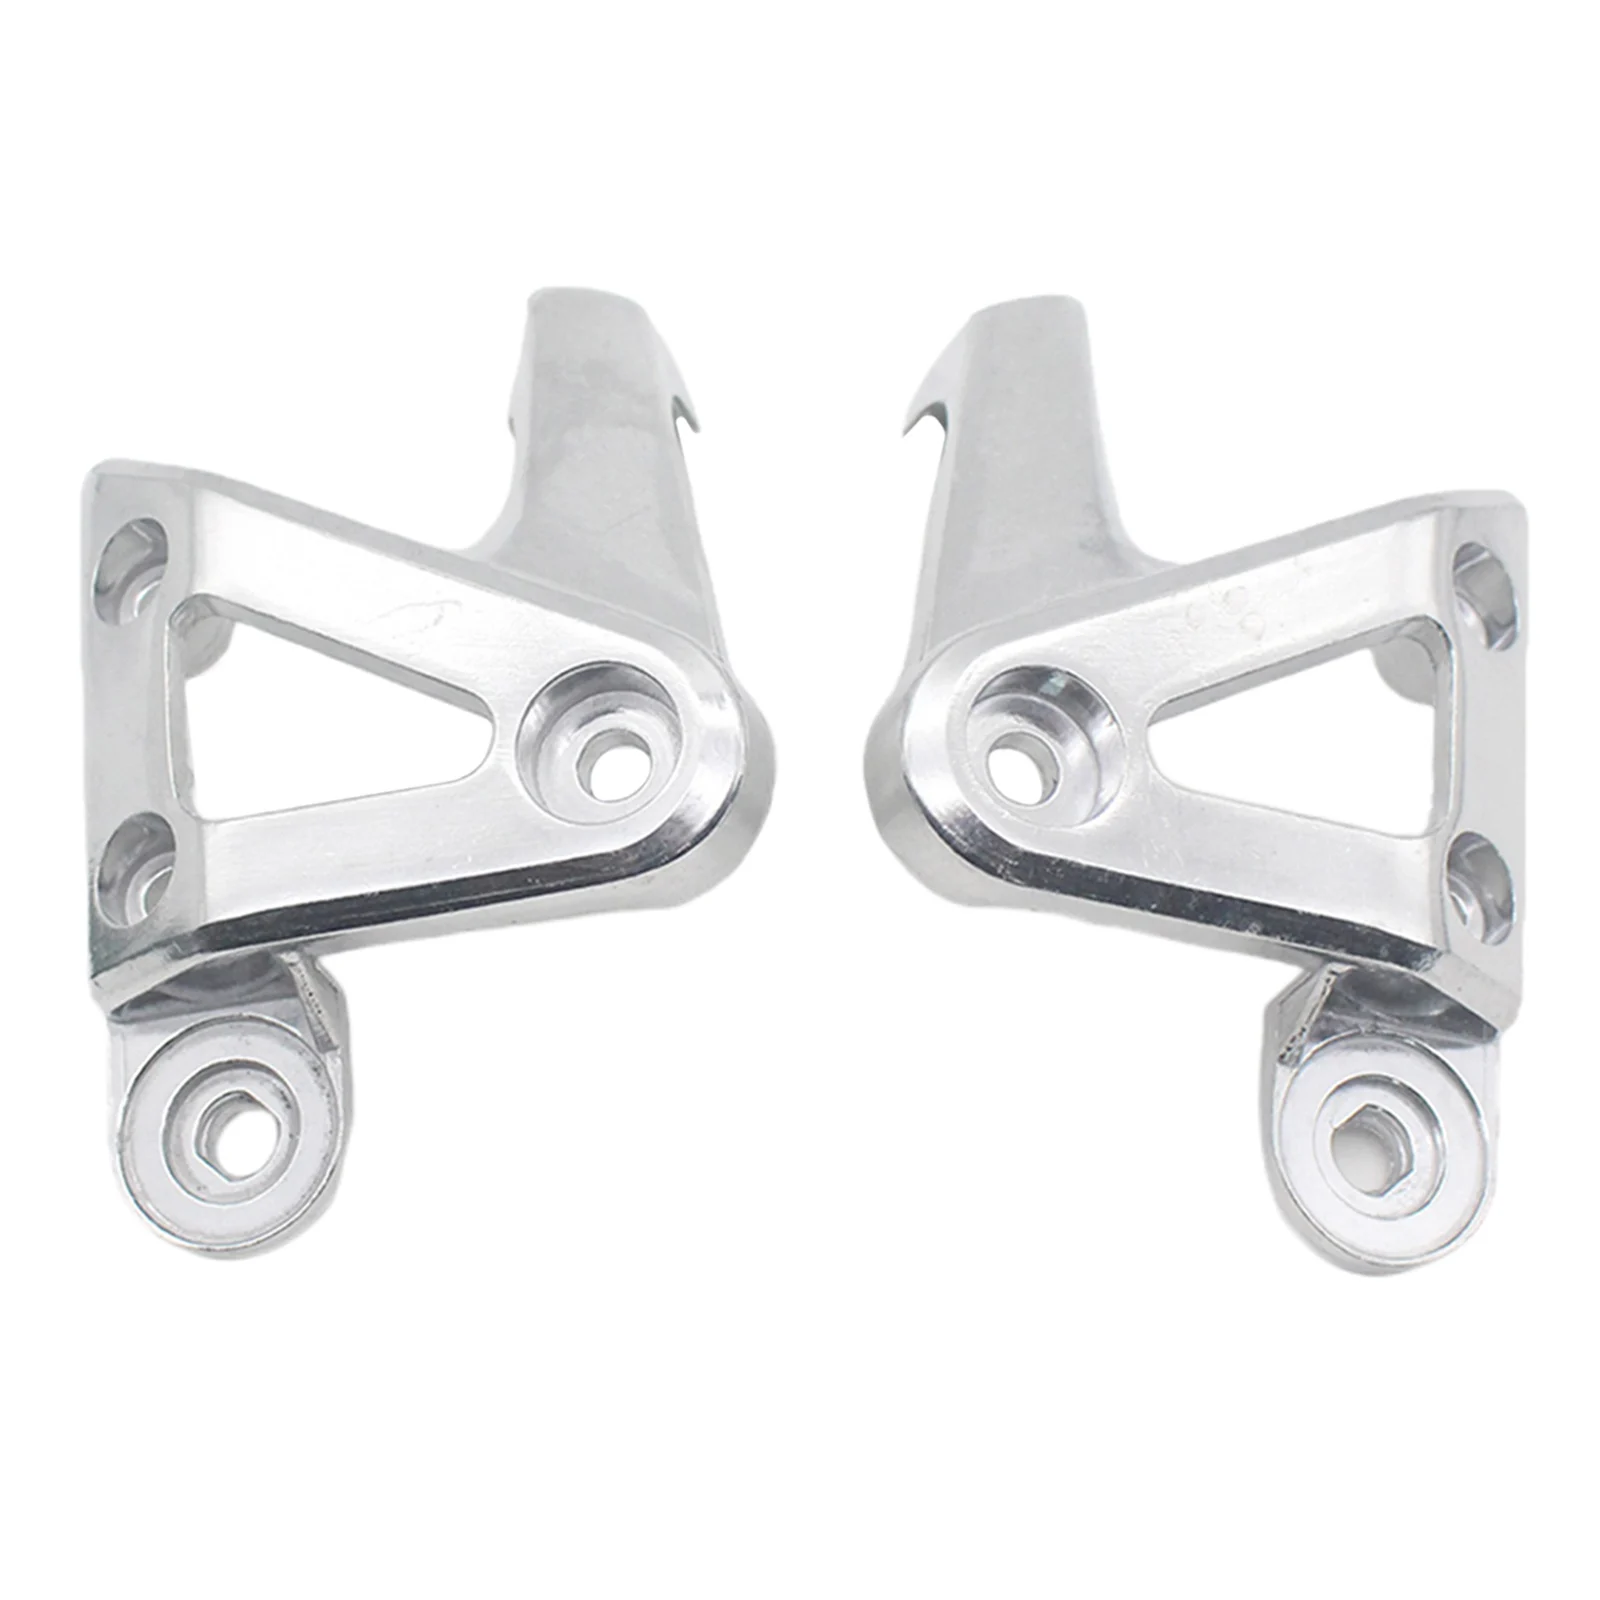 1 Set Motorcycles Headlight Mount Holders For Honda CB400 VTEC 1/2/3 1999-2008 Motorcycle Replacement Parts Accessories